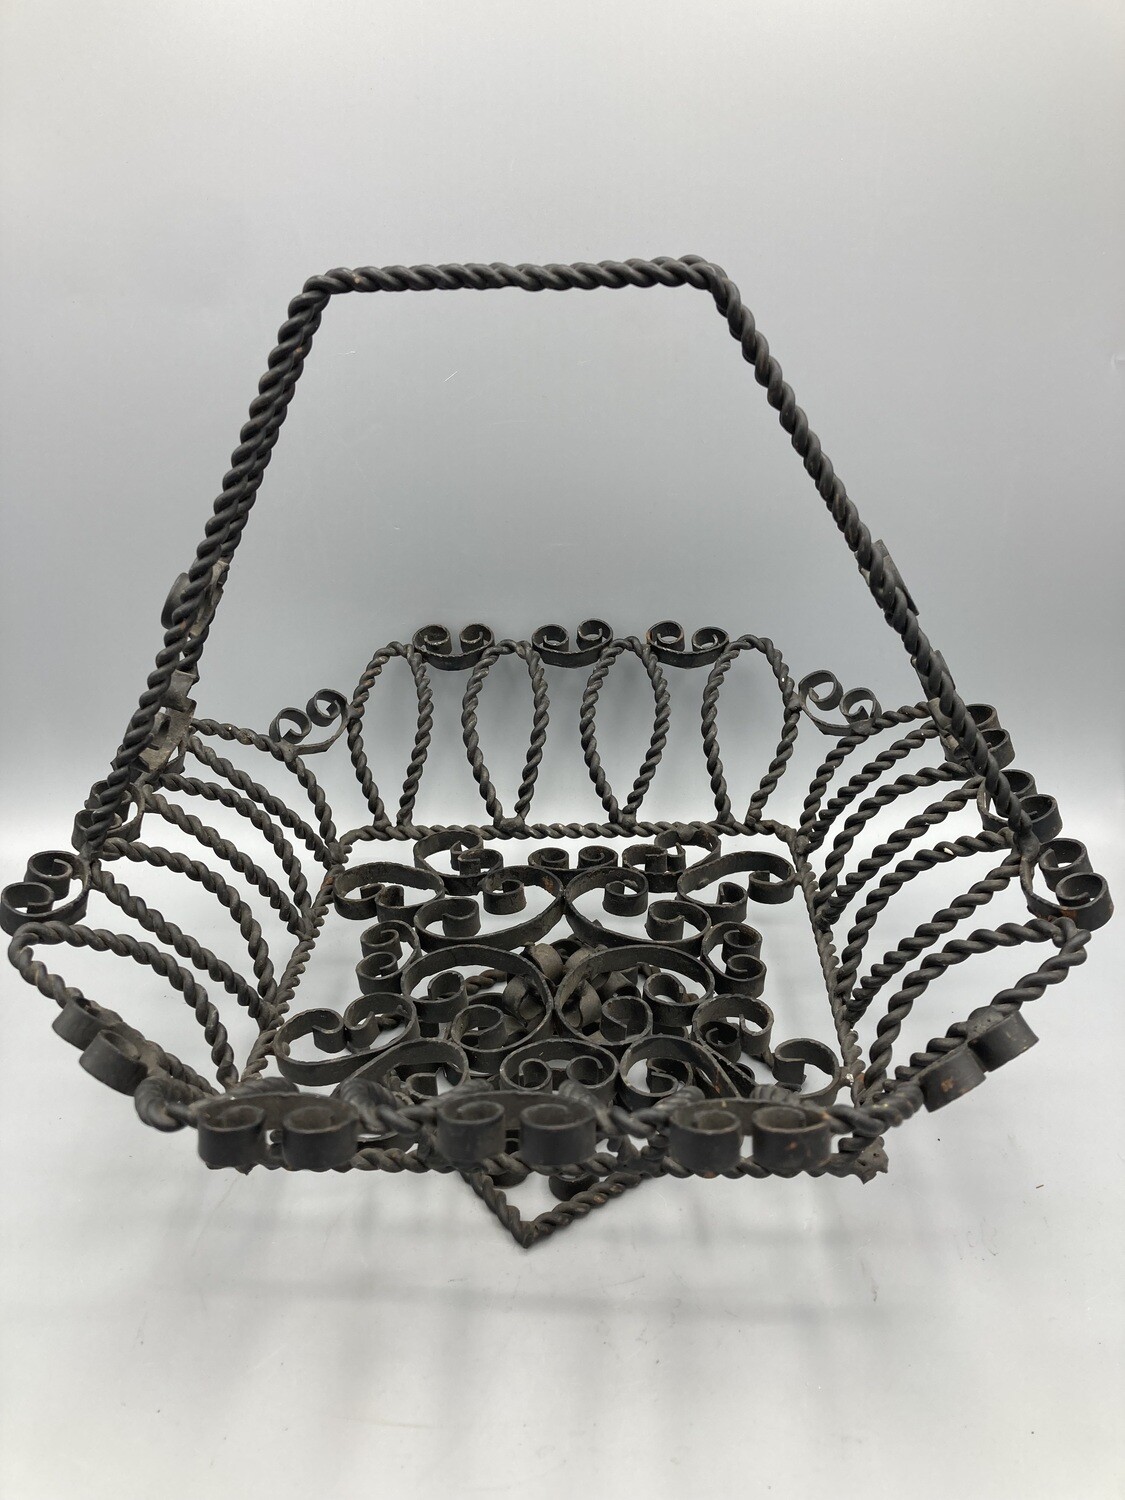 Spanish Revival Wrought Iron Scrolled Basket